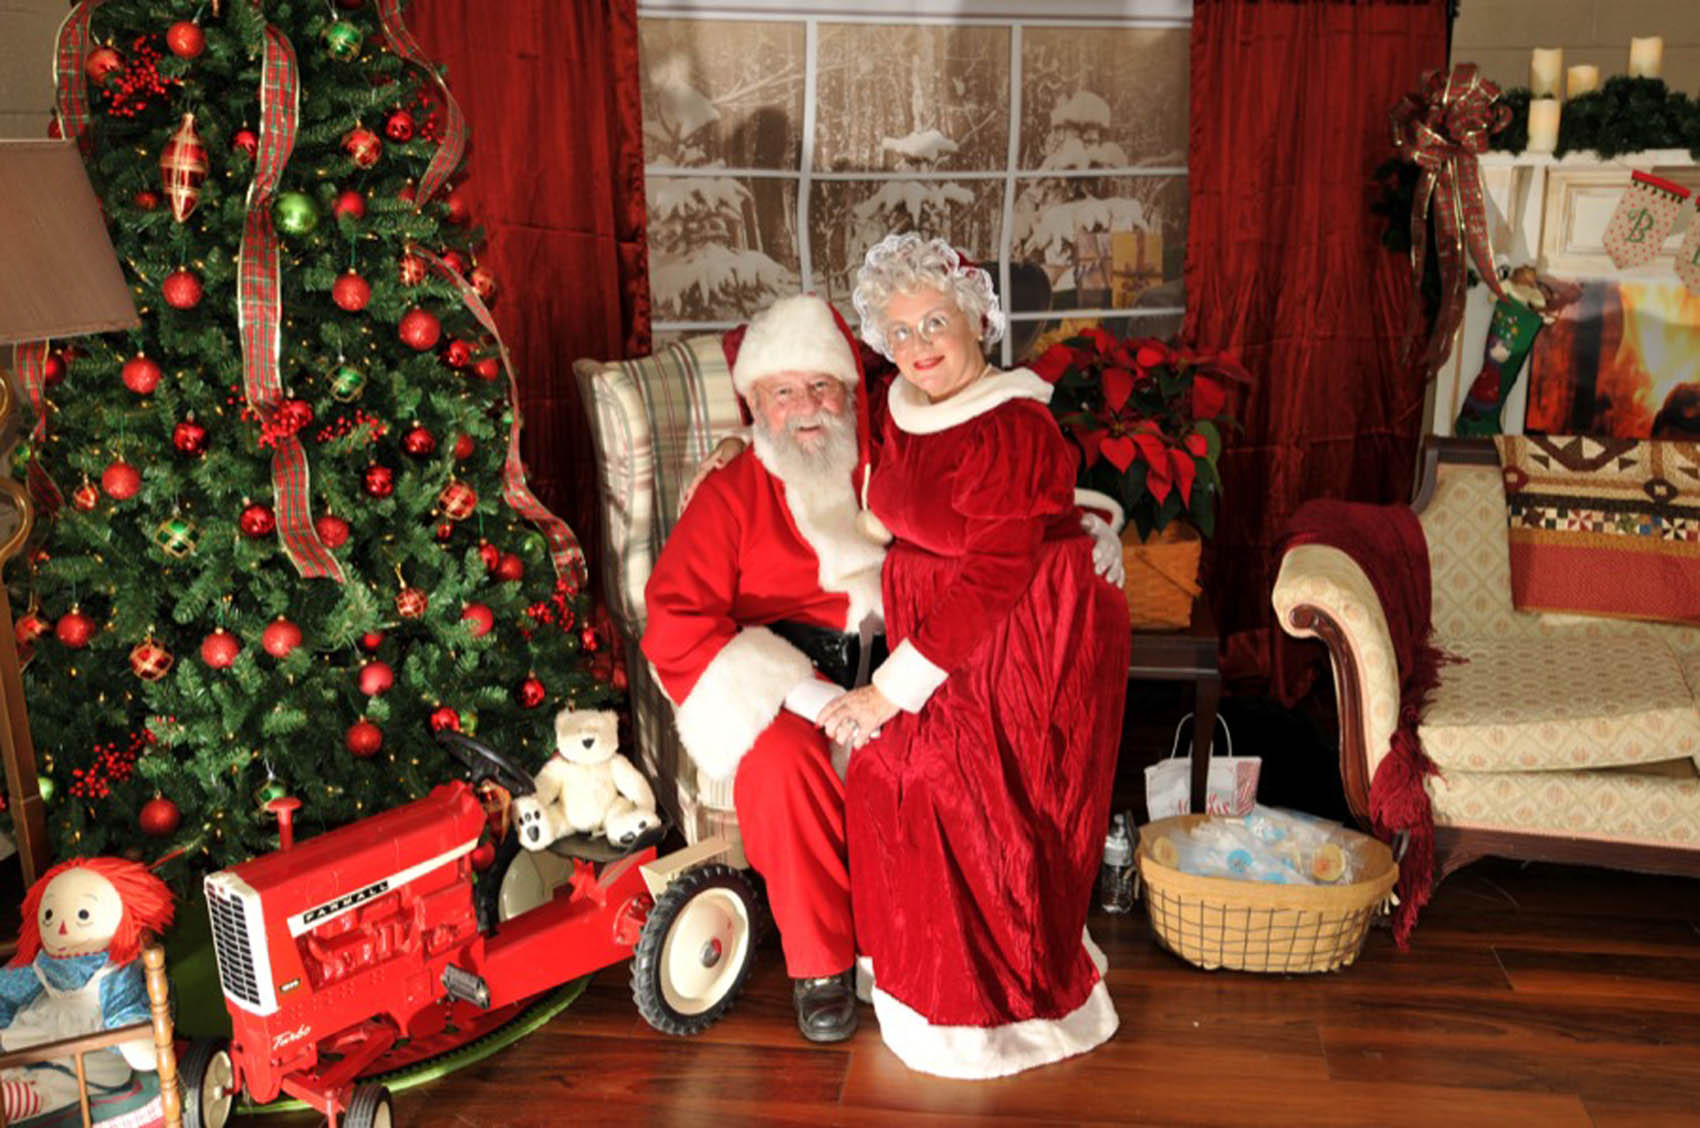 Read the full story, Santa invites all to CCCC Foundation's Christmas Tree Lighting in Sanford